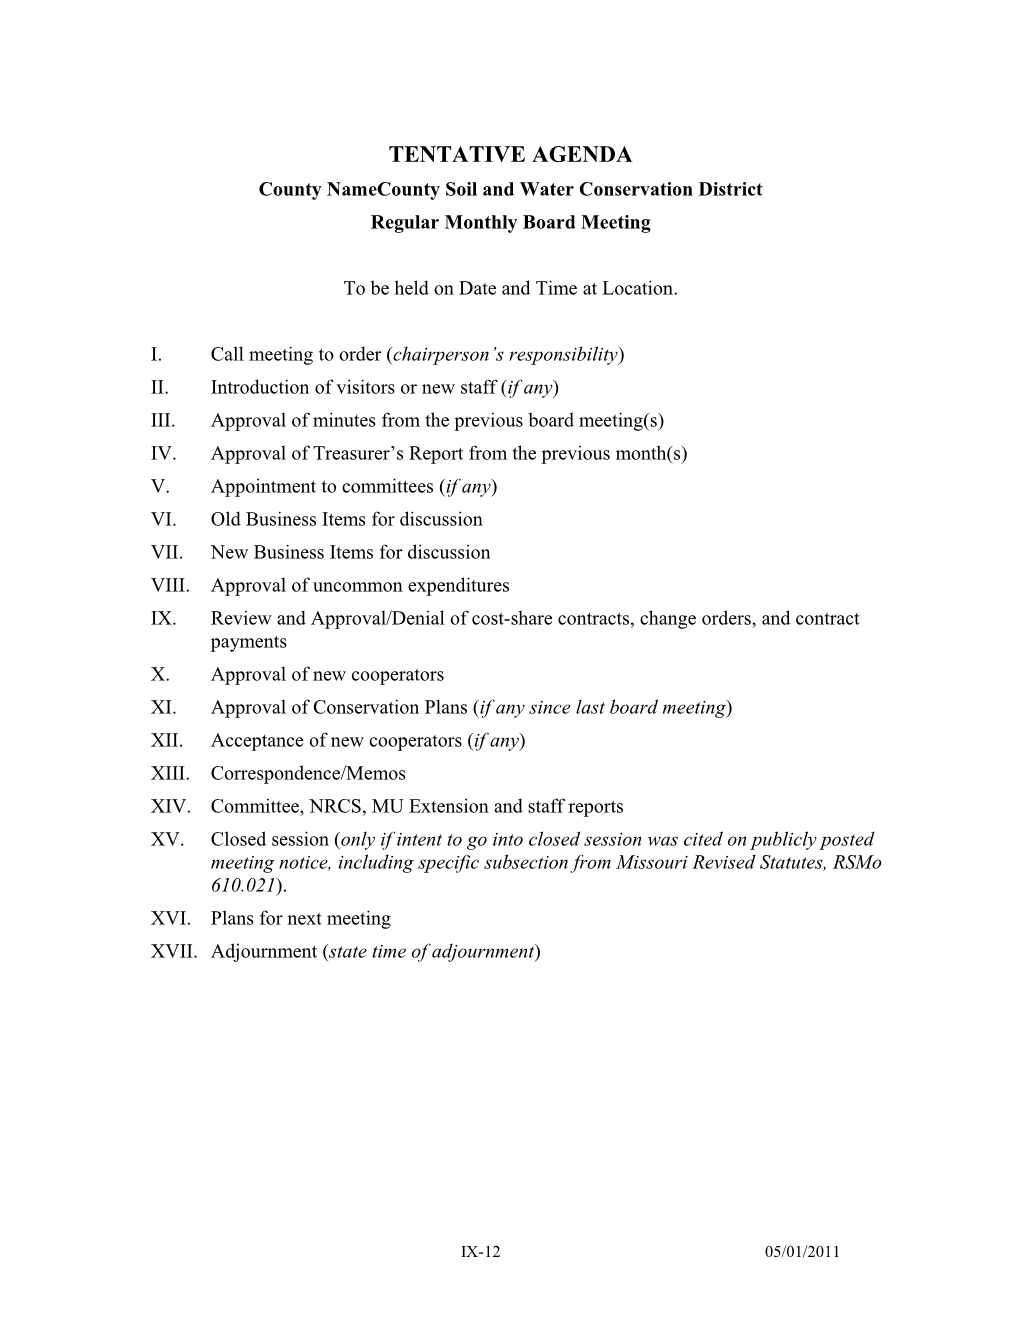 Tentative Agenda for the (District Name) County Soil and Water Conservation District S